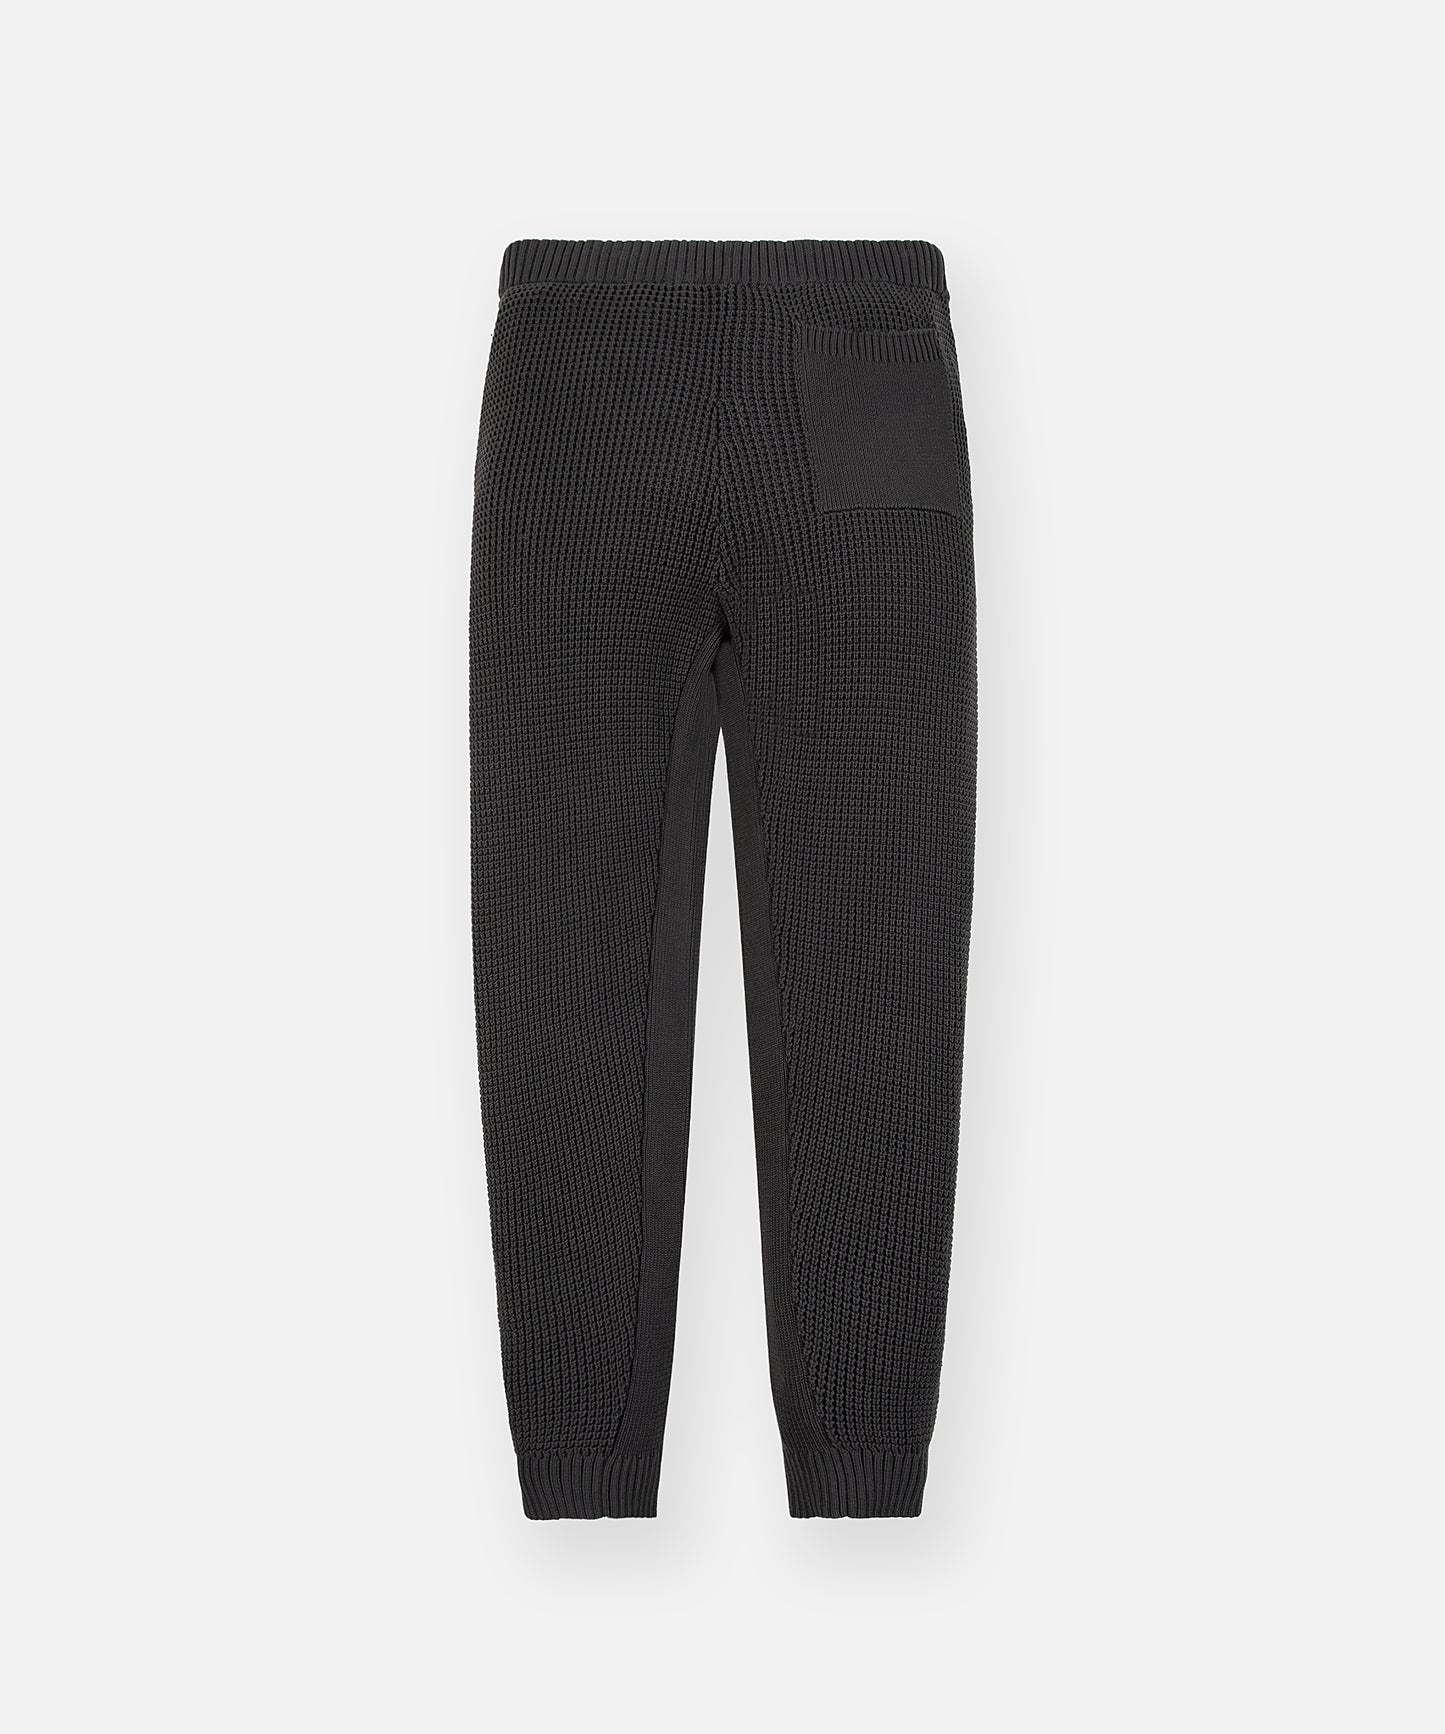 Paper Planes - SWEATER KNIT JOGGER - Pirate Black